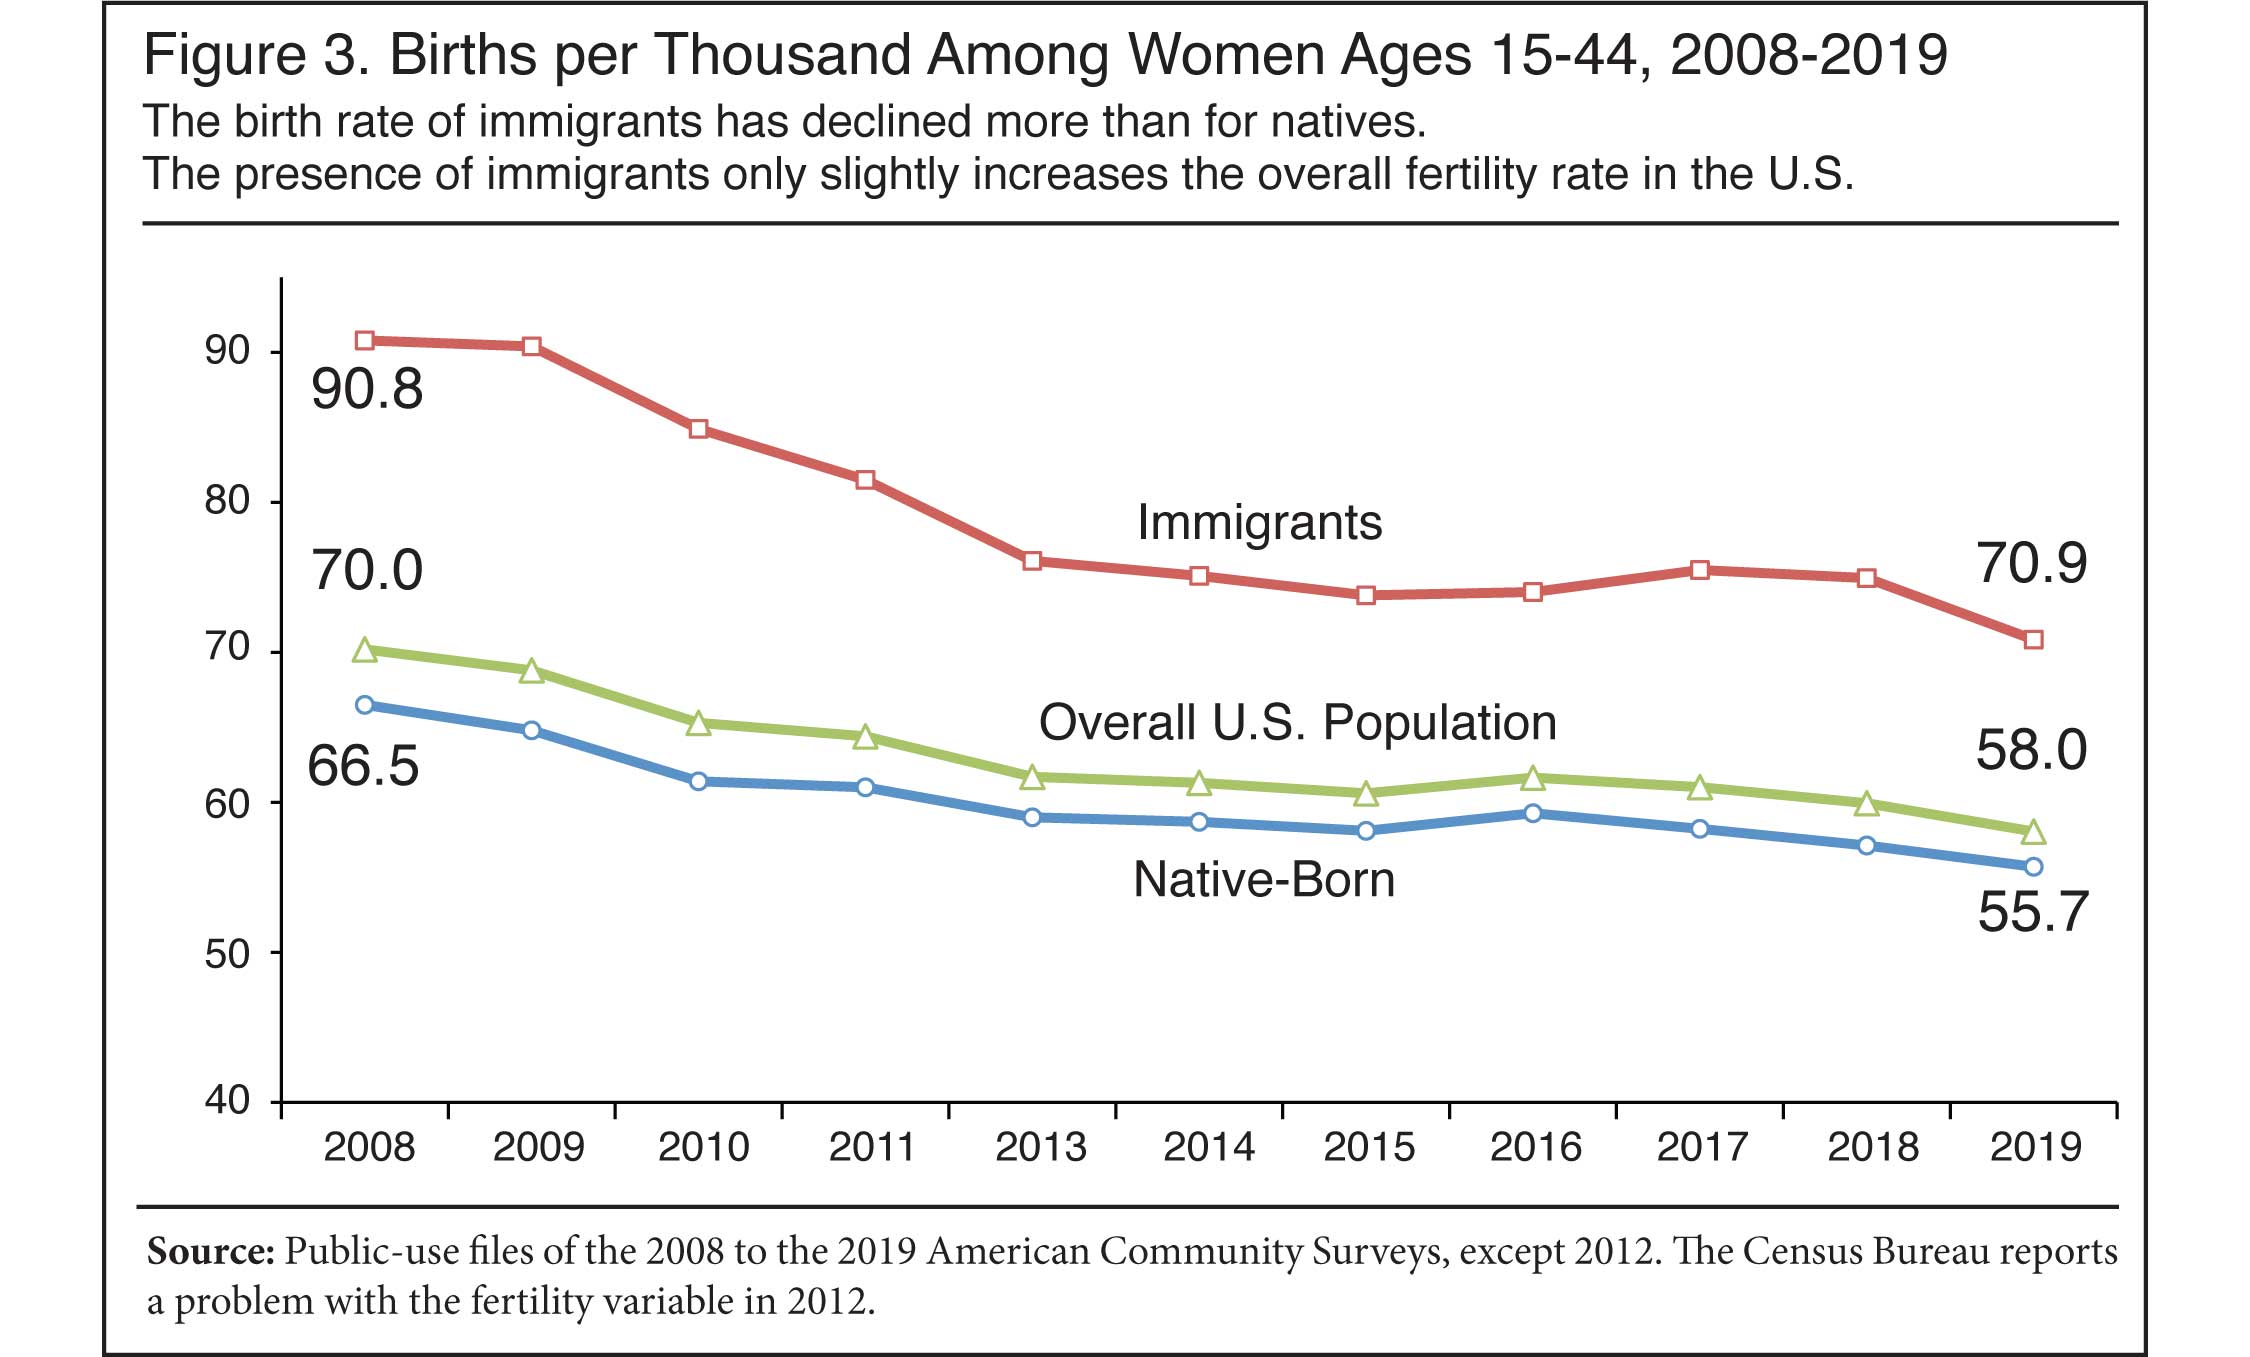 Graph: Births per Thousand Among Women Ages 15-44, 2008 to 2019